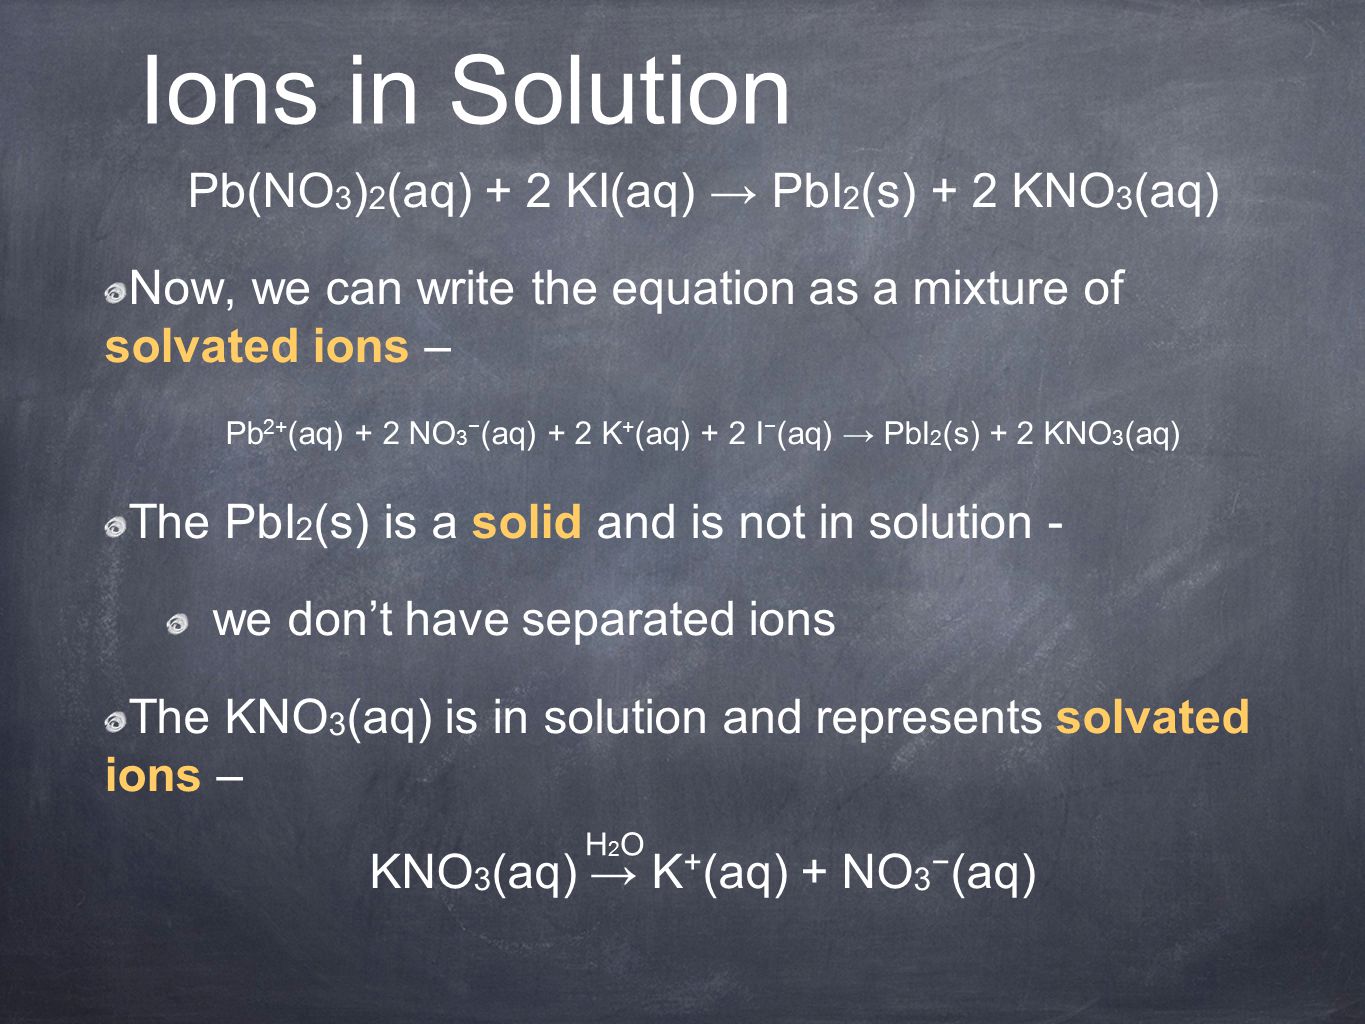 Ions in Solution Pb(NO 3 ) 2 (aq) + 2 KI(aq) → PbI 2 (s) + 2 KNO 3 (aq) Now, we can write the equation as a mixture of solvated ions – Pb 2+ (aq) + 2 NO 3 − (aq) + 2 K + (aq) + 2 I − (aq) → PbI 2 (s) + 2 KNO 3 (aq) The PbI 2 (s) is a solid and is not in solution - we don’t have separated ions The KNO 3 (aq) is in solution and represents solvated ions – KNO 3 (aq) → K + (aq) + NO 3 − (aq) H2OH2O